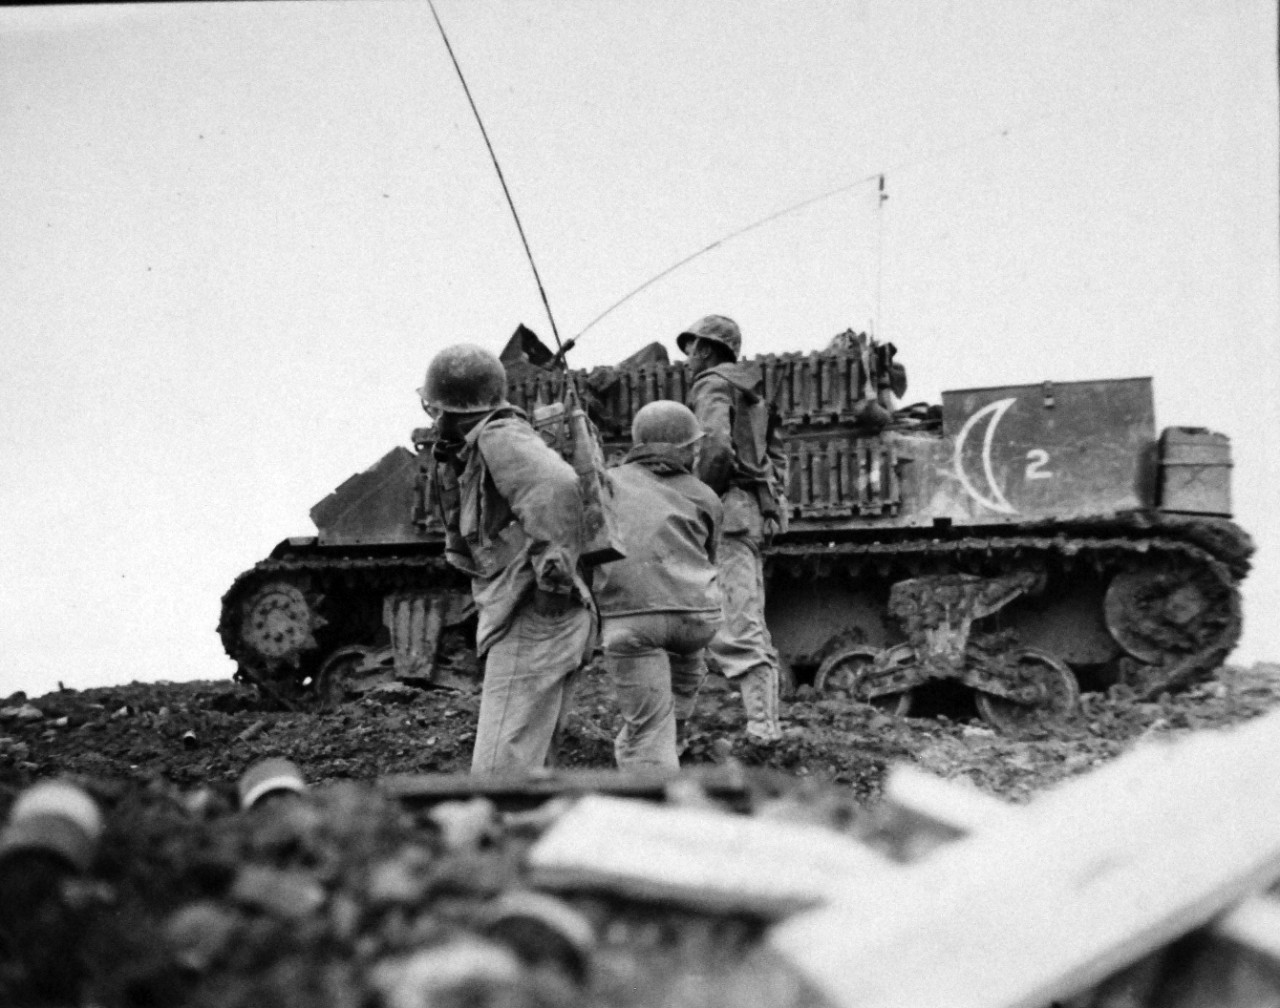 127-GW-518-122036:  Okinawa Campaign, April-June 1945.    Radioman and observer direct fire of M-7 in rear at Okinawa.  Photographed by Corporal Yakimovich, 24 May 1945.  Official U.S. Navy Photograph, now in the collections of the National Archives.   (2014/6/25). 